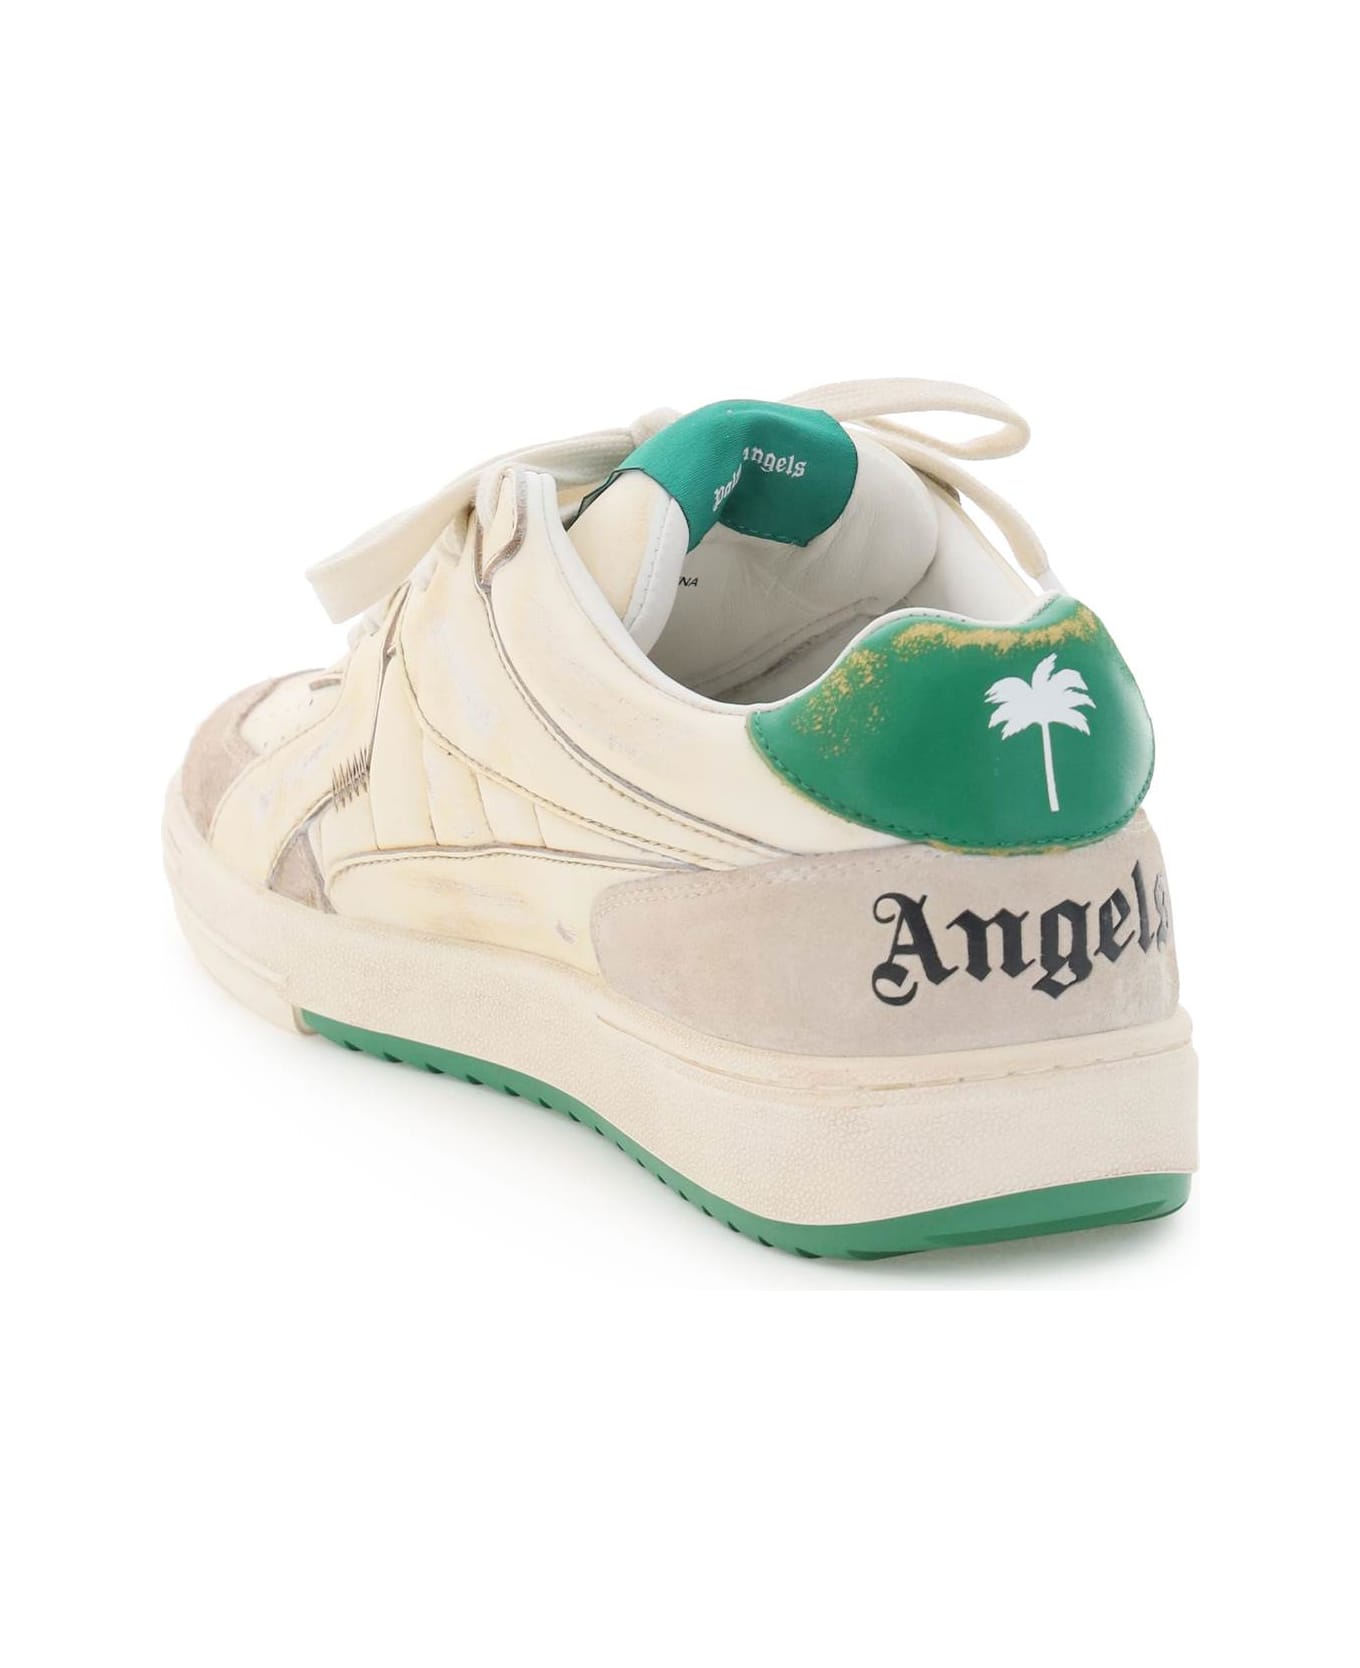 Palm Angels University Leather Sneakers - White Green